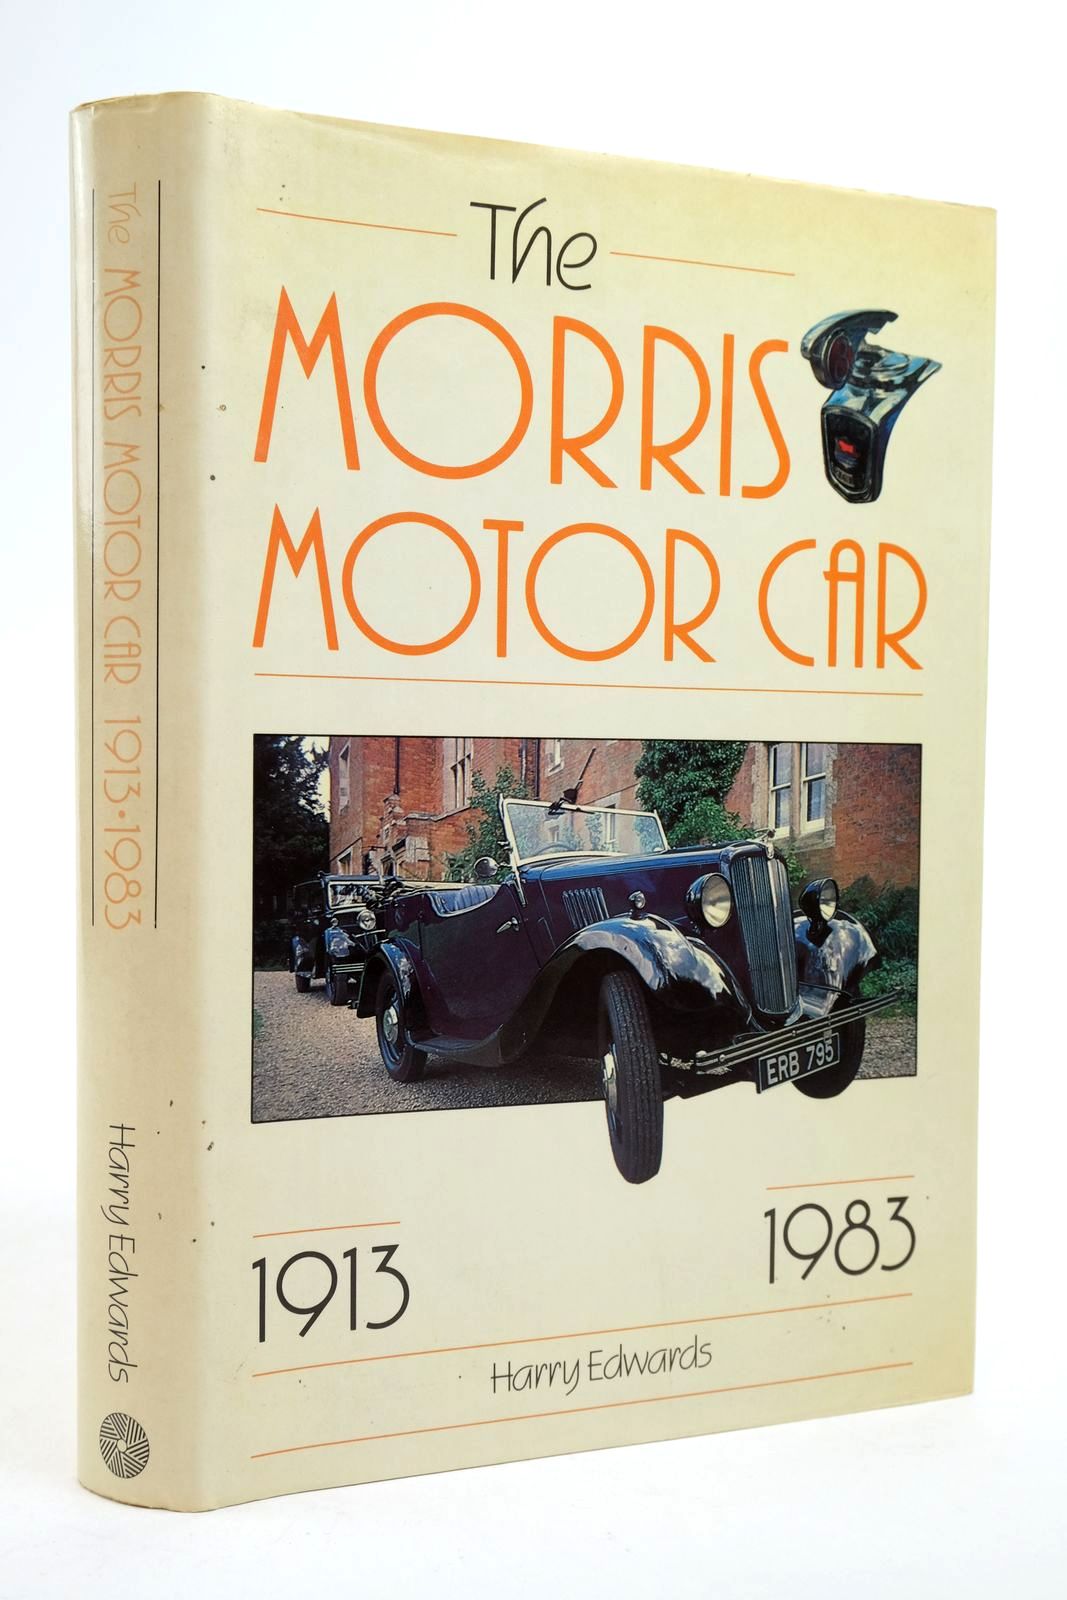 Photo of THE MORRIS MOTOR CAR 1913 - 1983 written by Edwards, Harry published by Moorland Publishing (STOCK CODE: 2139535)  for sale by Stella & Rose's Books